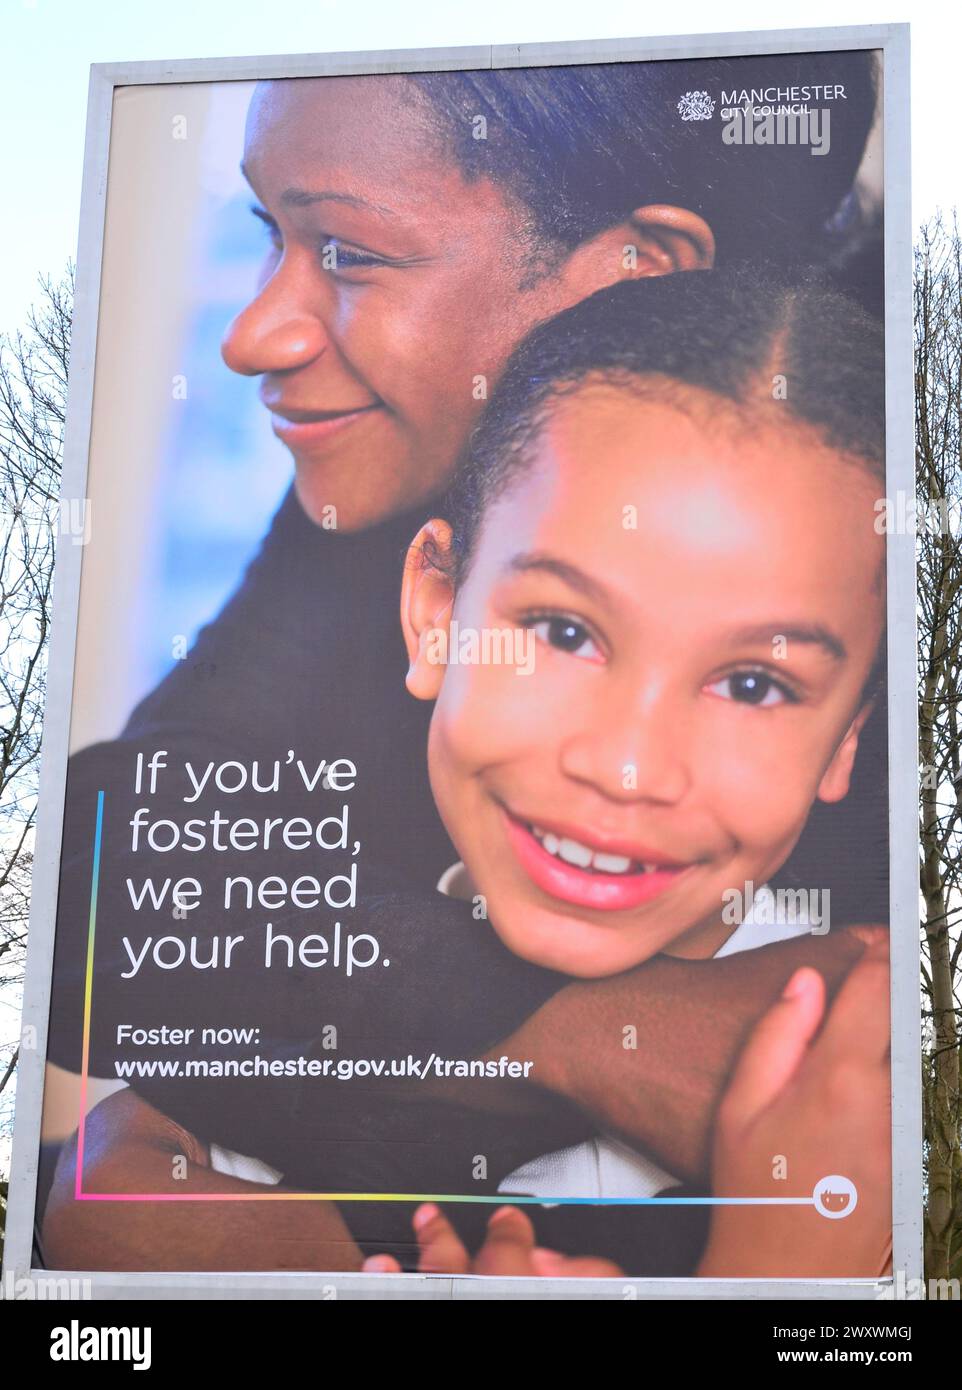 A  billboard paid for by Manchester City Council in Manchester UK advertises the need for past foster parents to foster again Stock Photo